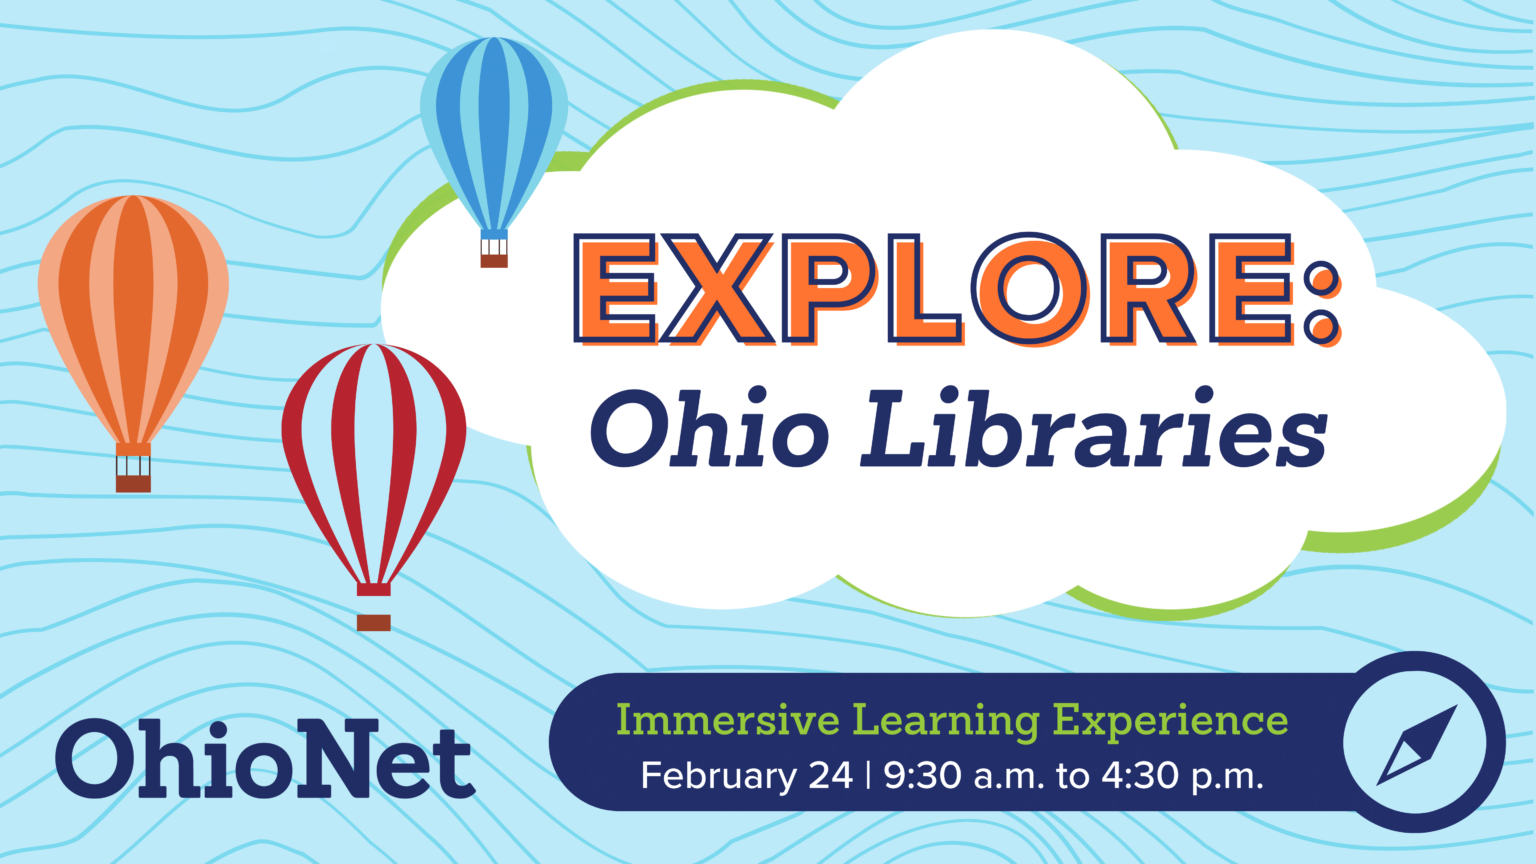 Did you miss the EXPLORE Ohio Libraries info session? Session